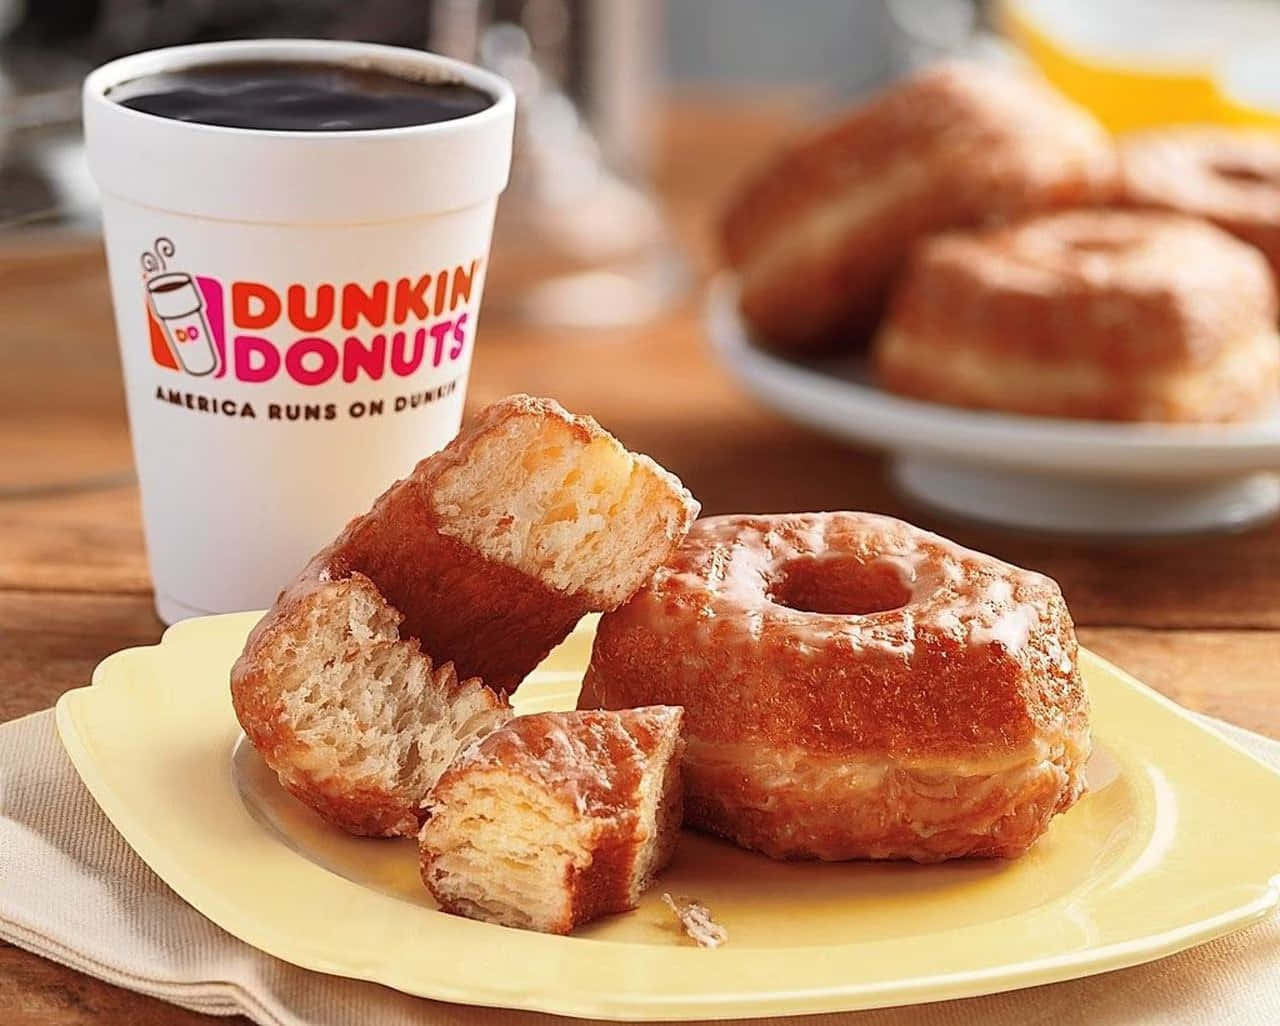 Enjoy delicious donuts anytime at Dunkin Donuts!